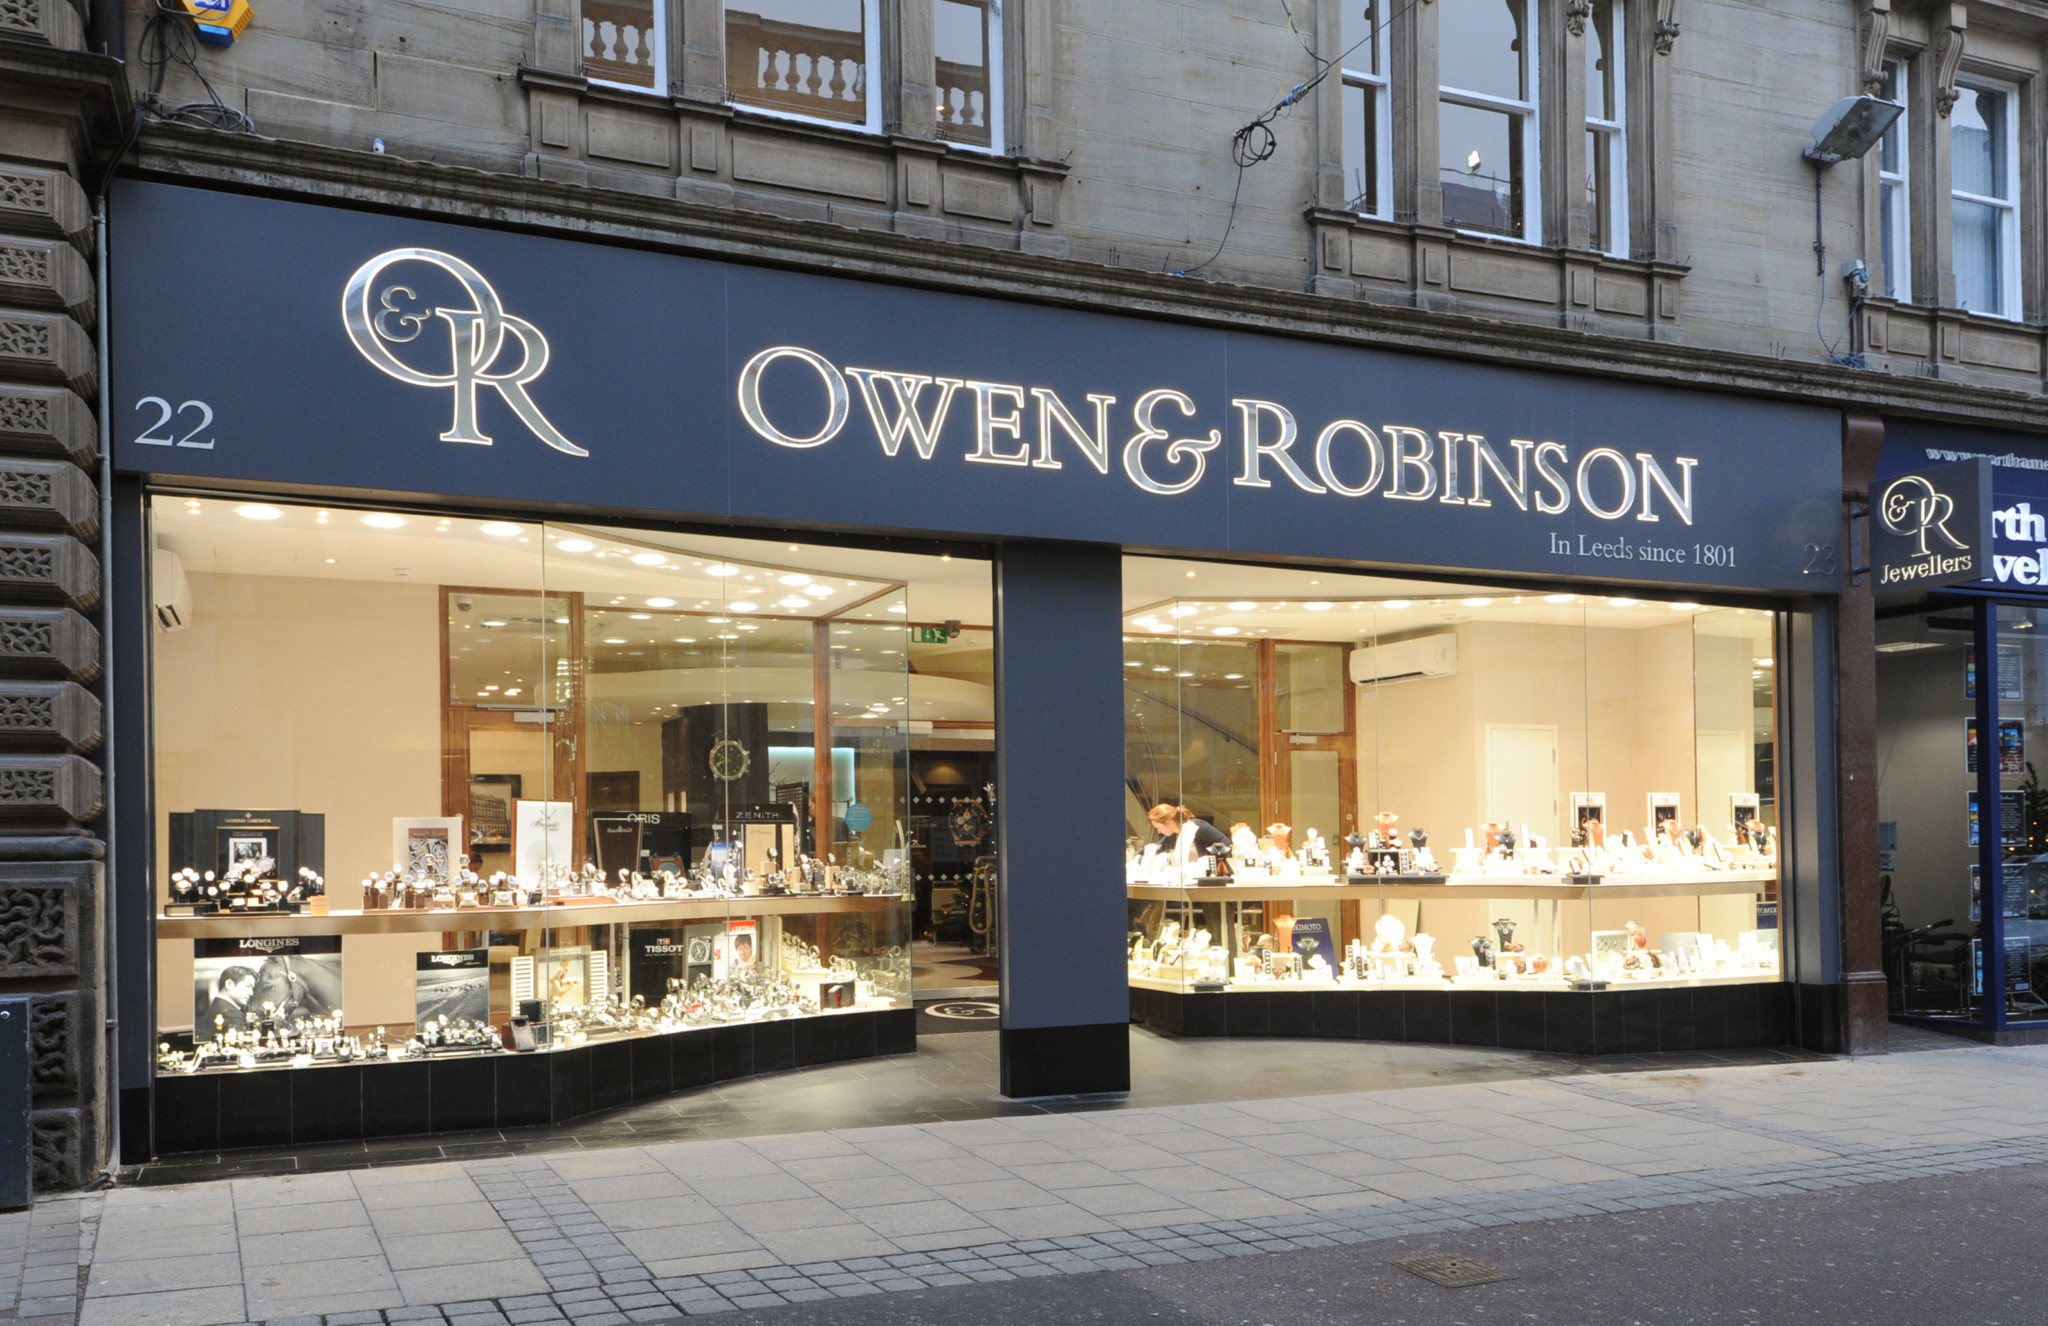 Owen & robinson, owned by berry's parent company, is one of the only stockists outside london for a. Lange & sohne, richard mille and vacheron constantin.